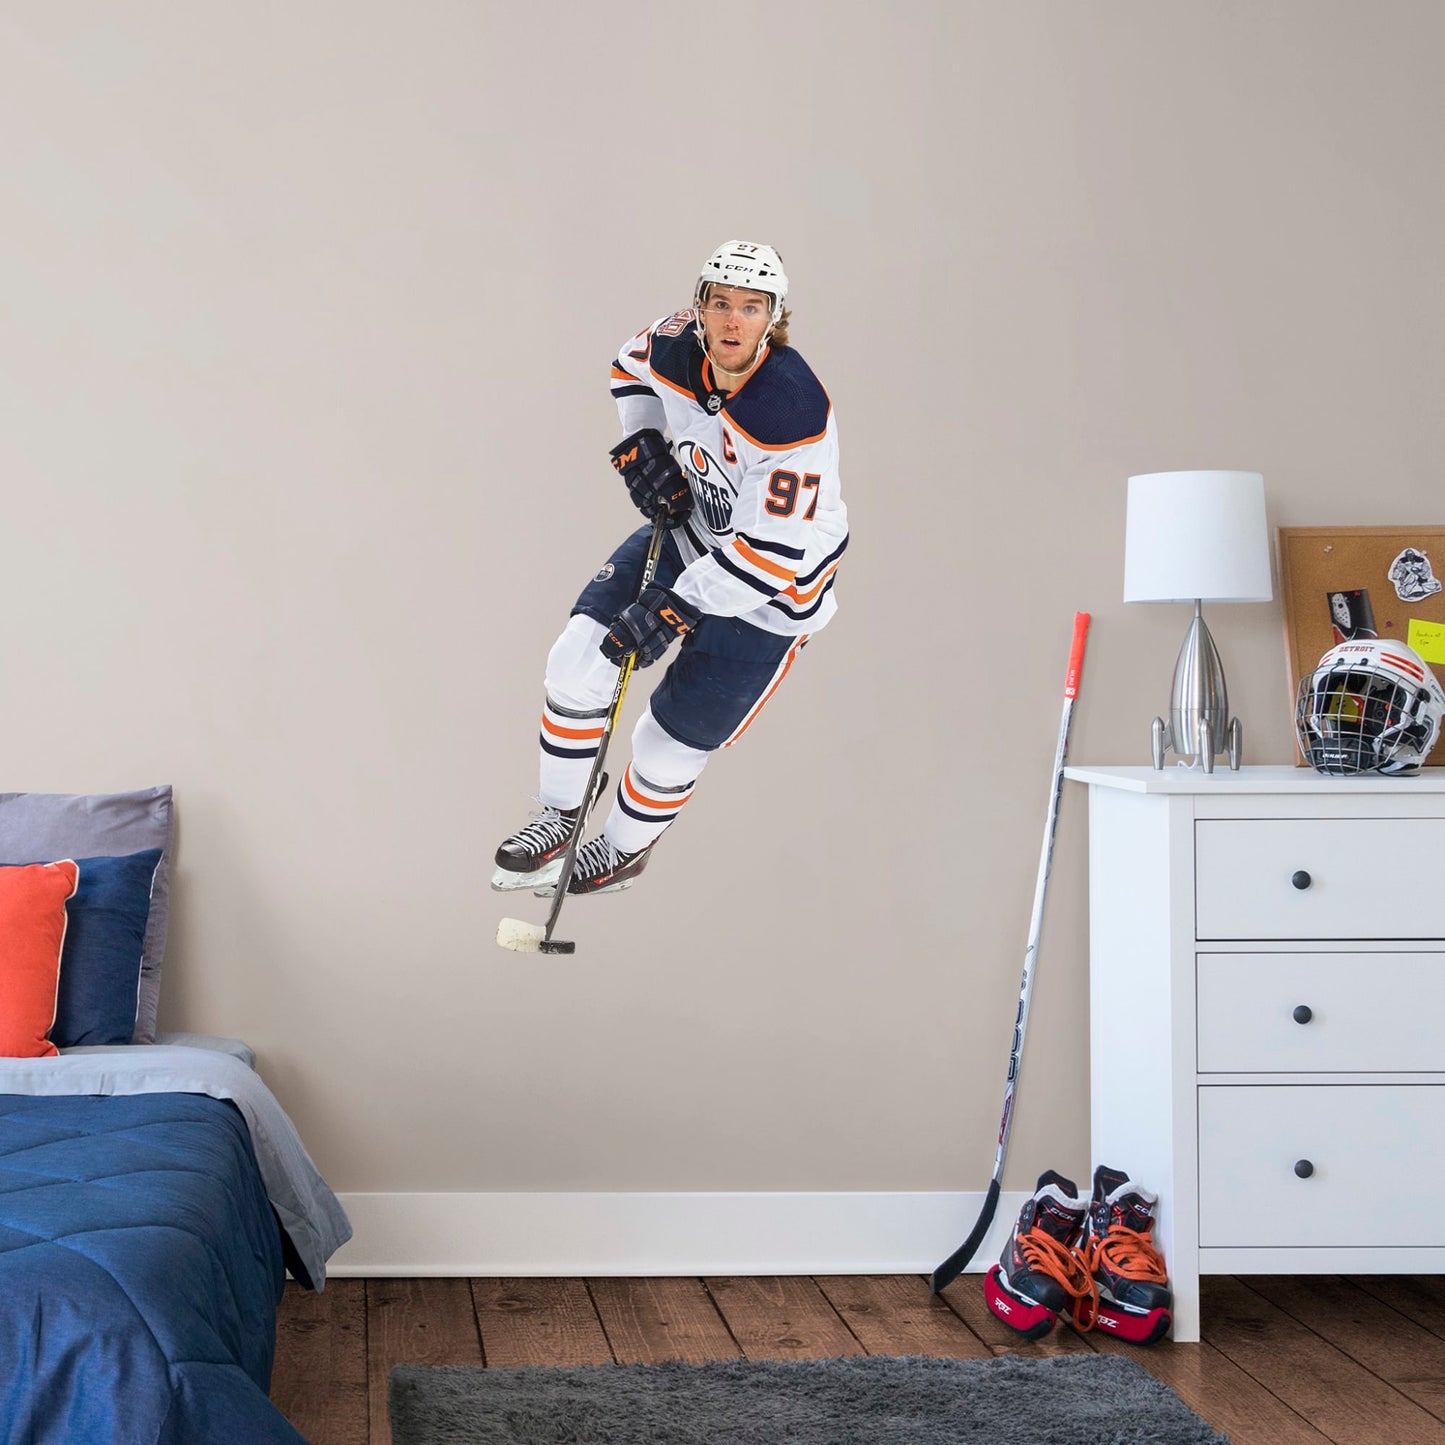 Giant Athlete + 2 Team Decals (26"W x 51"H) Widely considered to be among the best NHL players in the world, Edmonton Oilers centre and team captain Connor McDavid has cemented himself as a high-caliber player for the Oilers. Affectionately referred to as “Connor McSaviour” and the “Canadian Super Promise,” this officially licensed NHL wall decal depicts the full frame of the Edmonton Oiler’s 2015 first overall draft pick in his Away uniform.